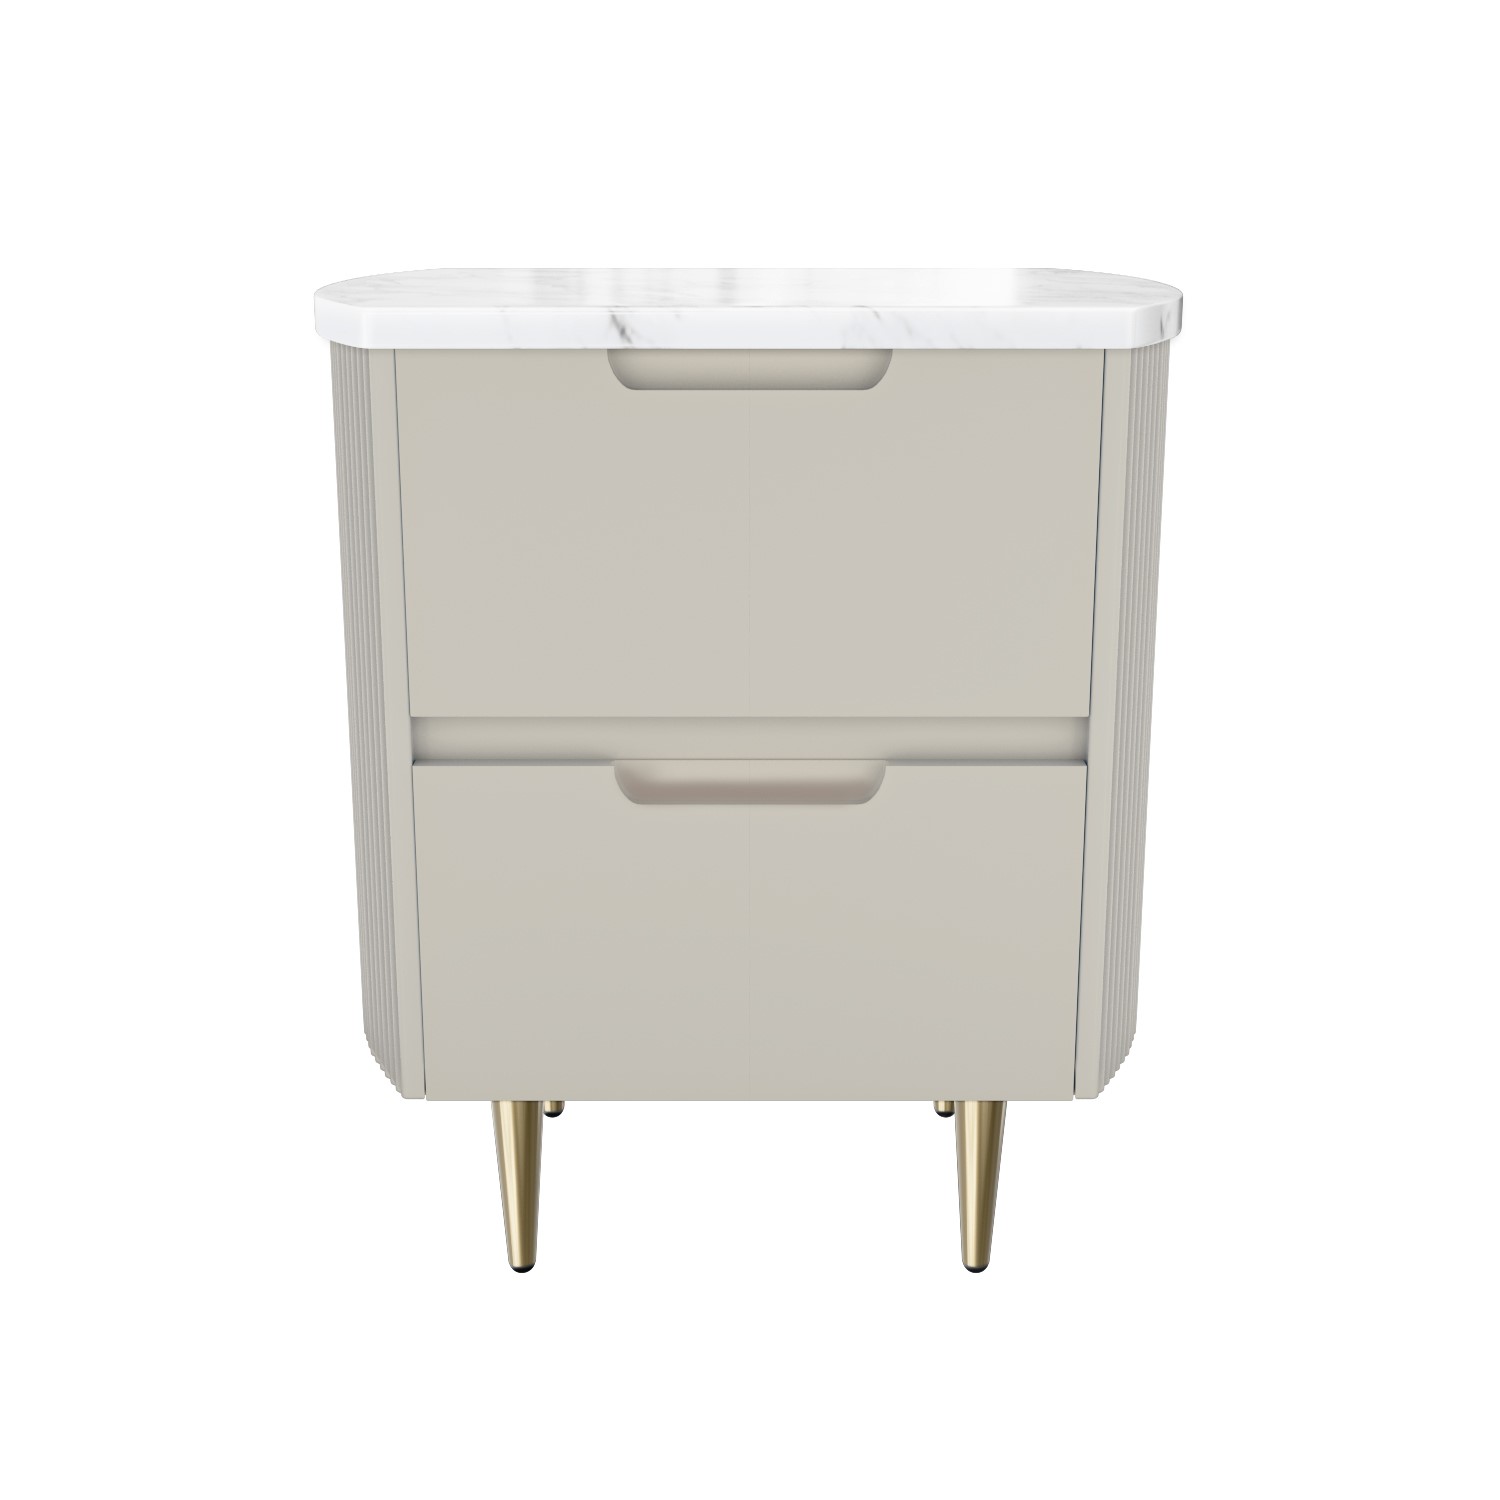 Read more about Curved taupe 2 drawer bedside table with marble top lorenzo